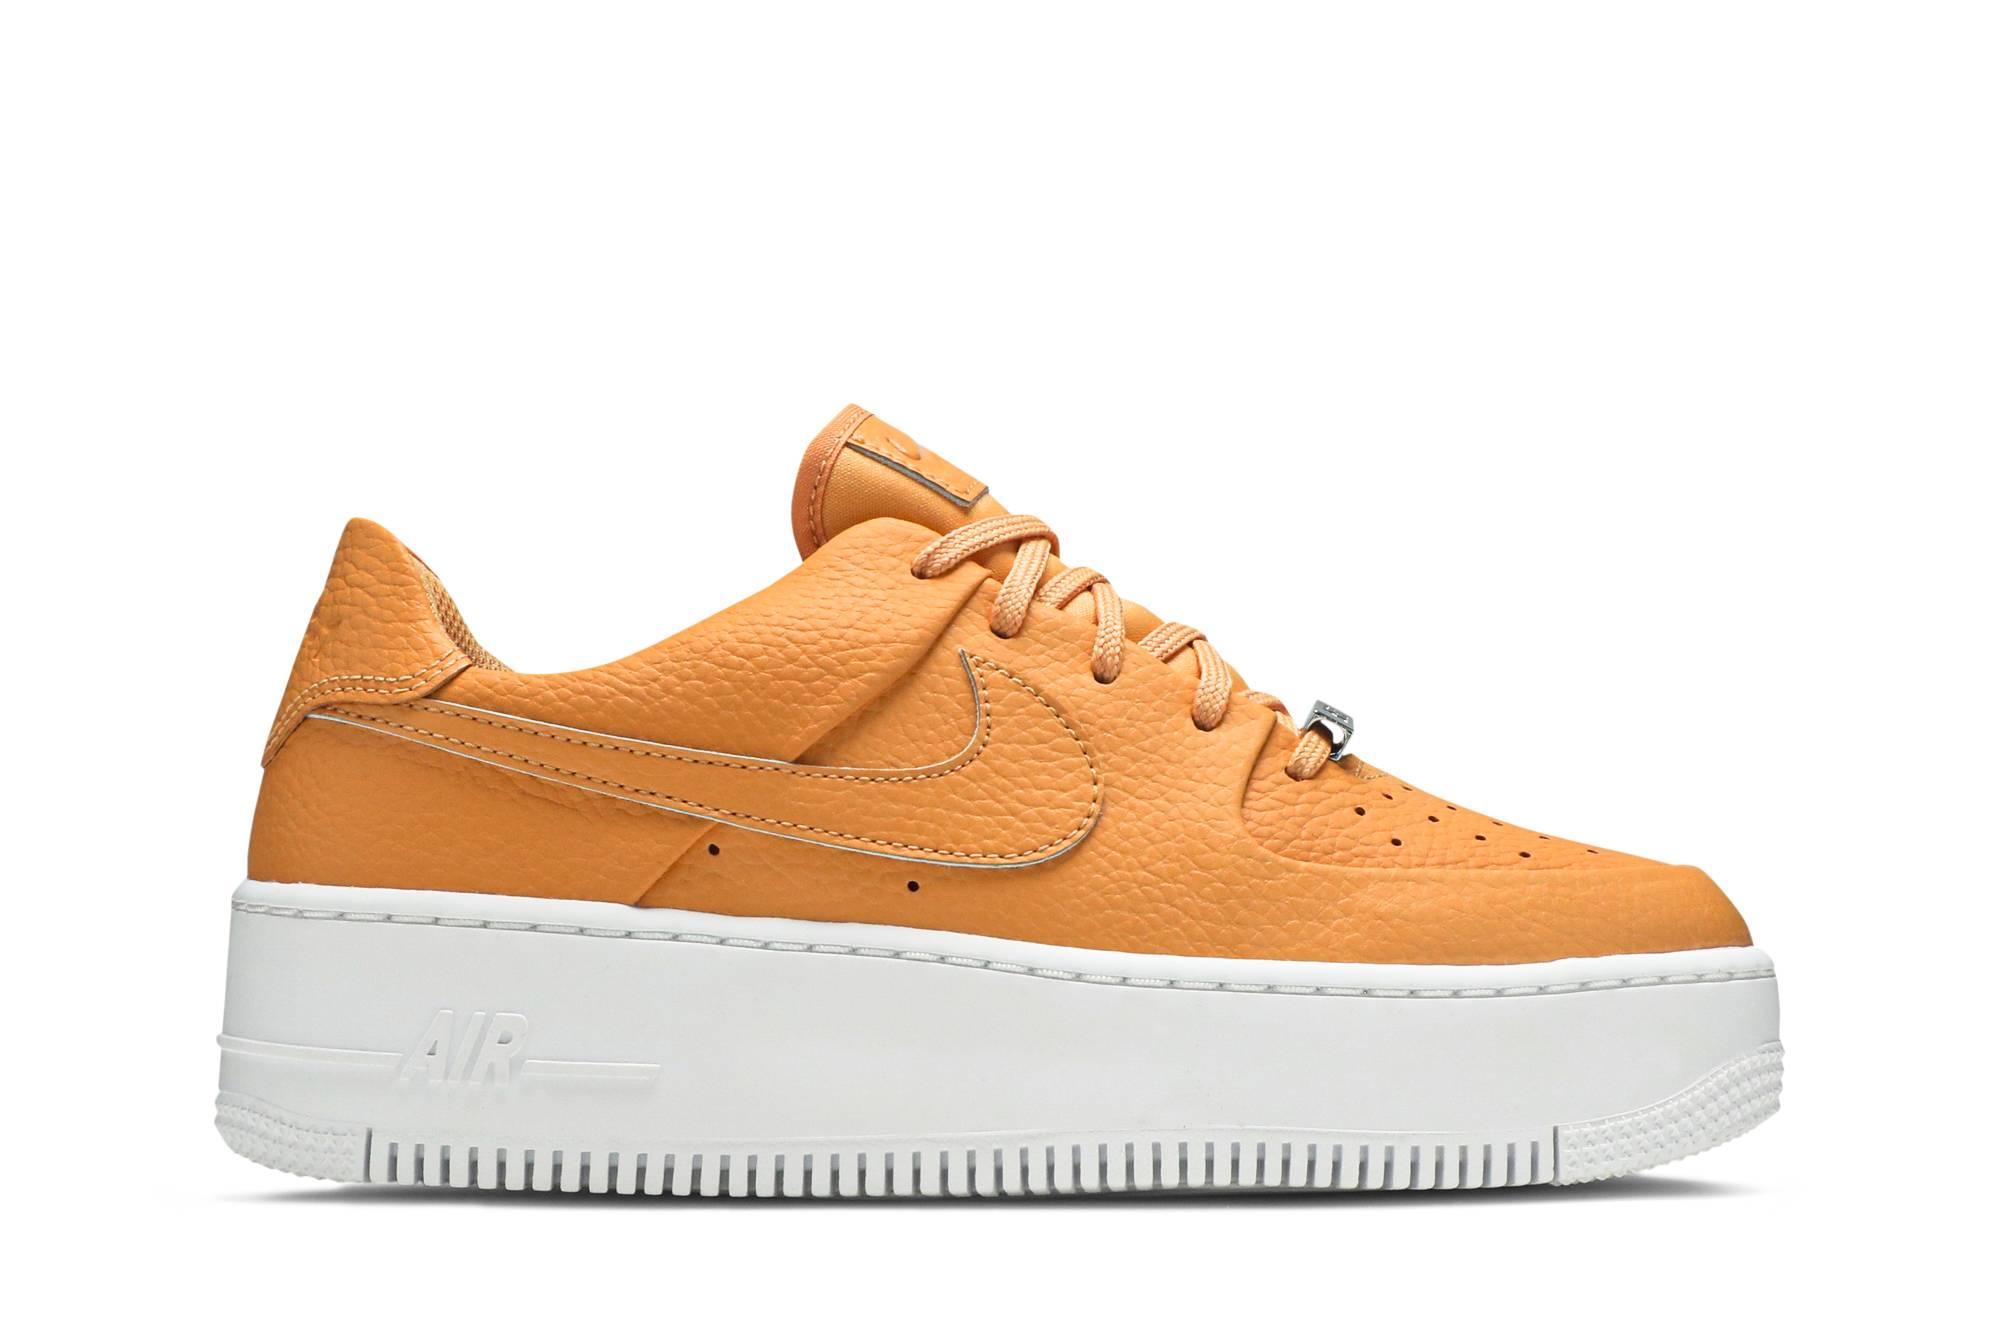 Nike Air Force 1 Sage Low Top White Sole Sneaker in Orange (Brown) - Save  90% - Lyst